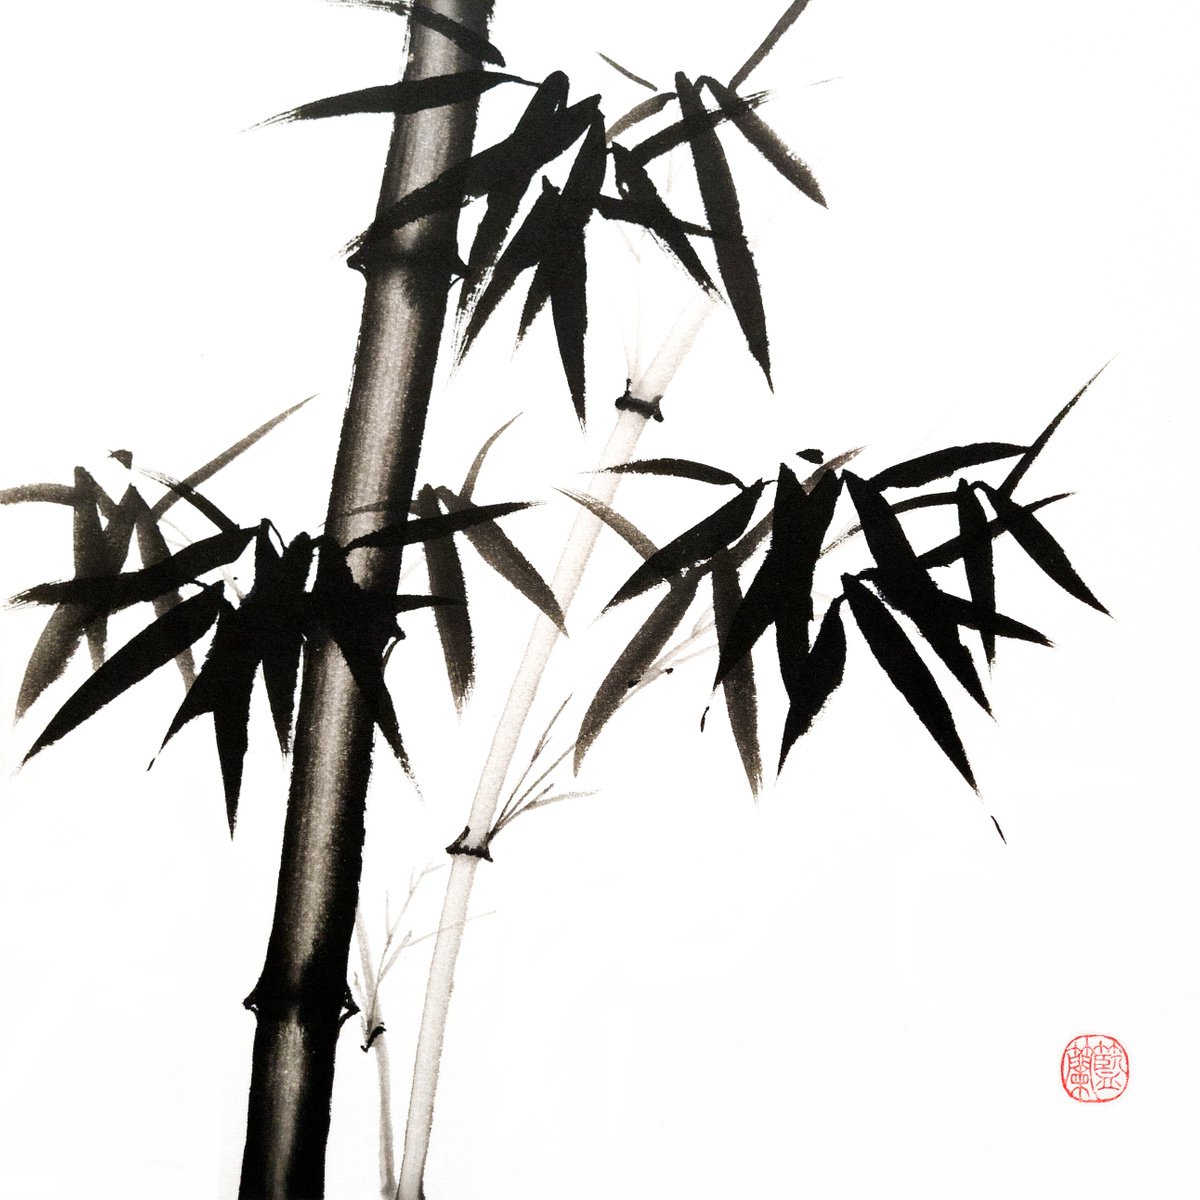 Bamboo forest - Bamboo series No. 2127 - Oriental Chinese Ink Painting by Ilana Shechter